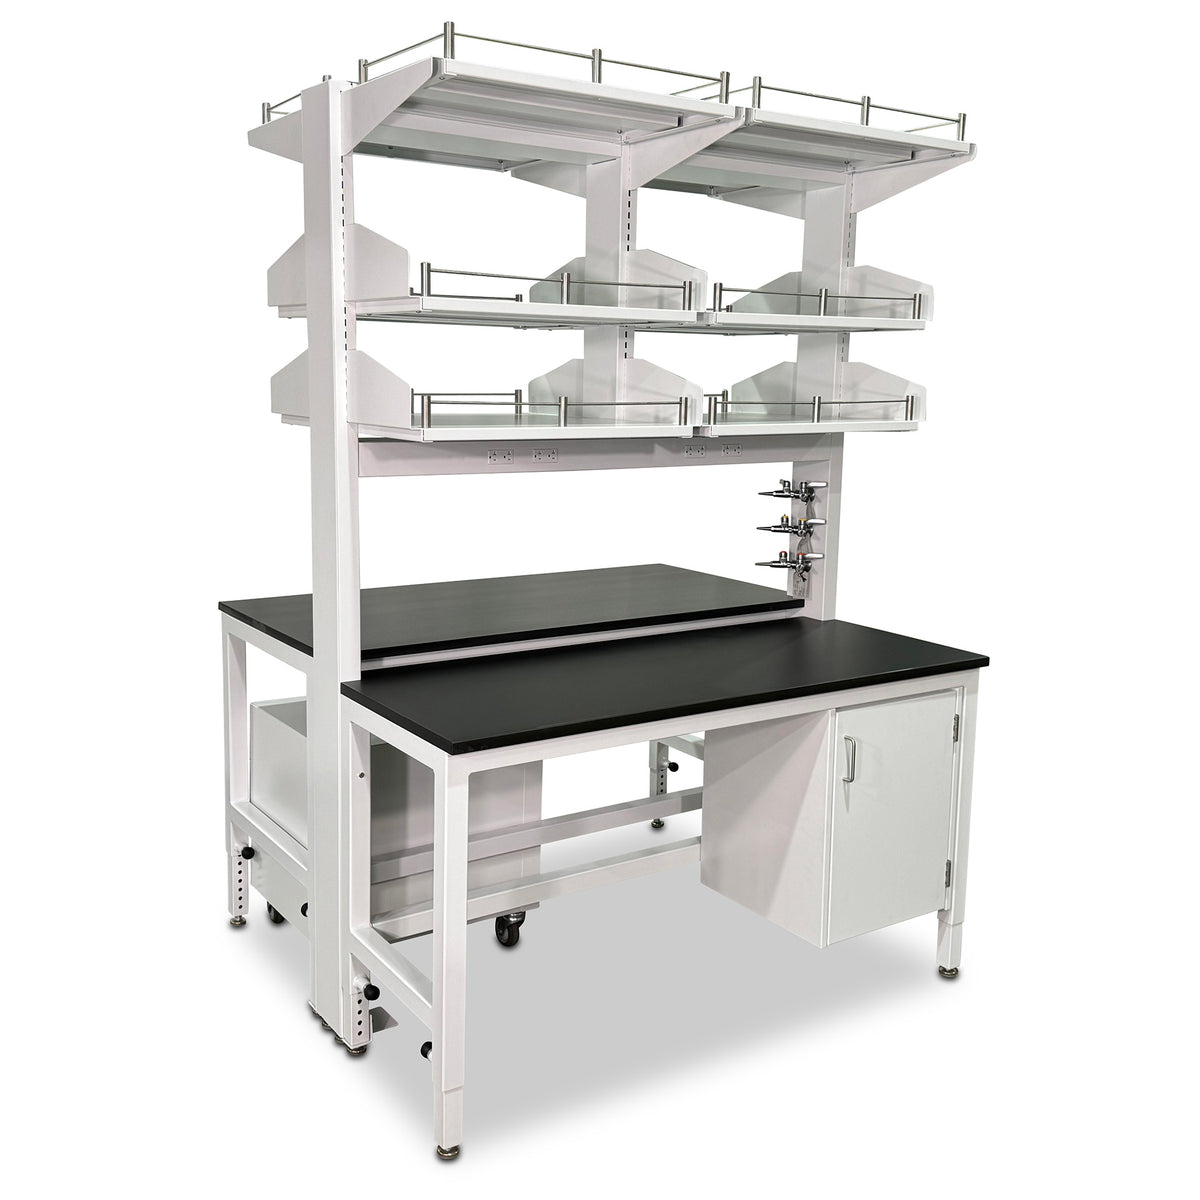 Avatar Lab Bench System - 05 - Double